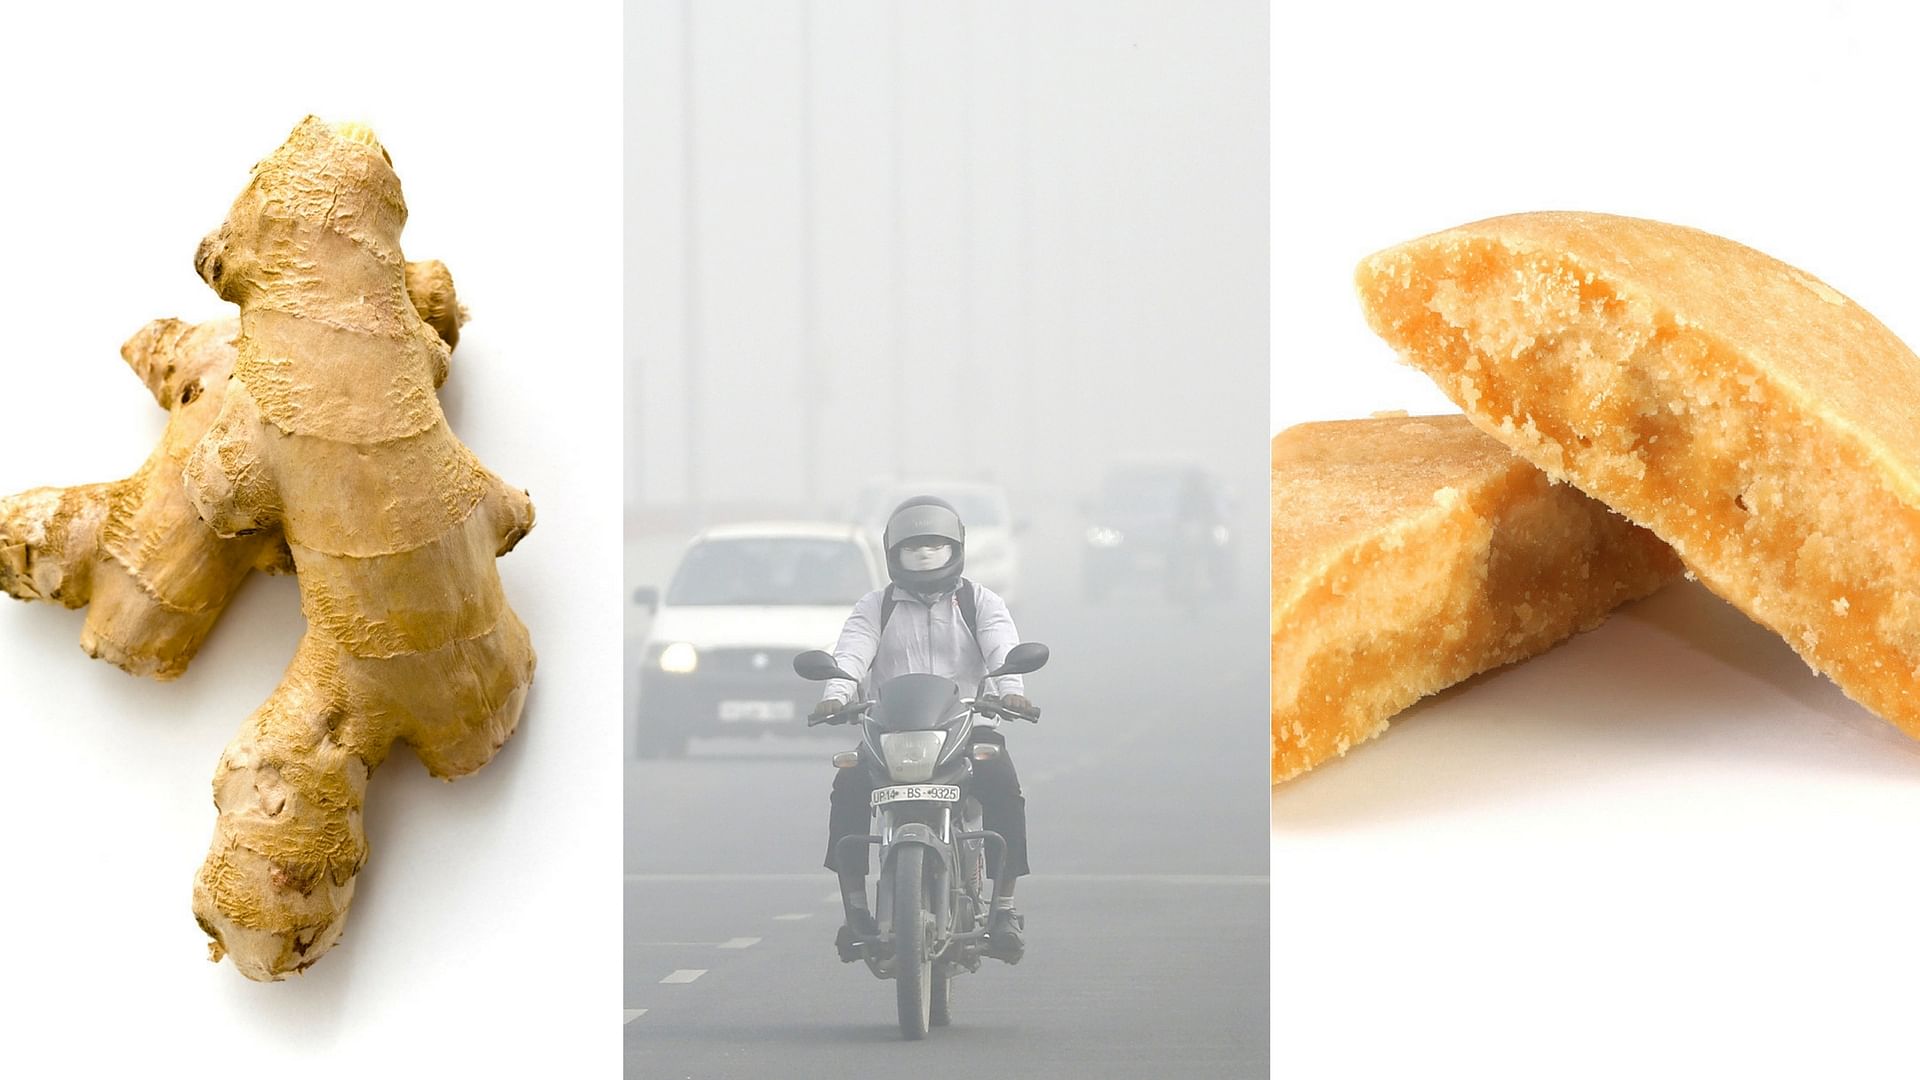 Ginger and Jaggery can help build immunity against pollution.&nbsp;